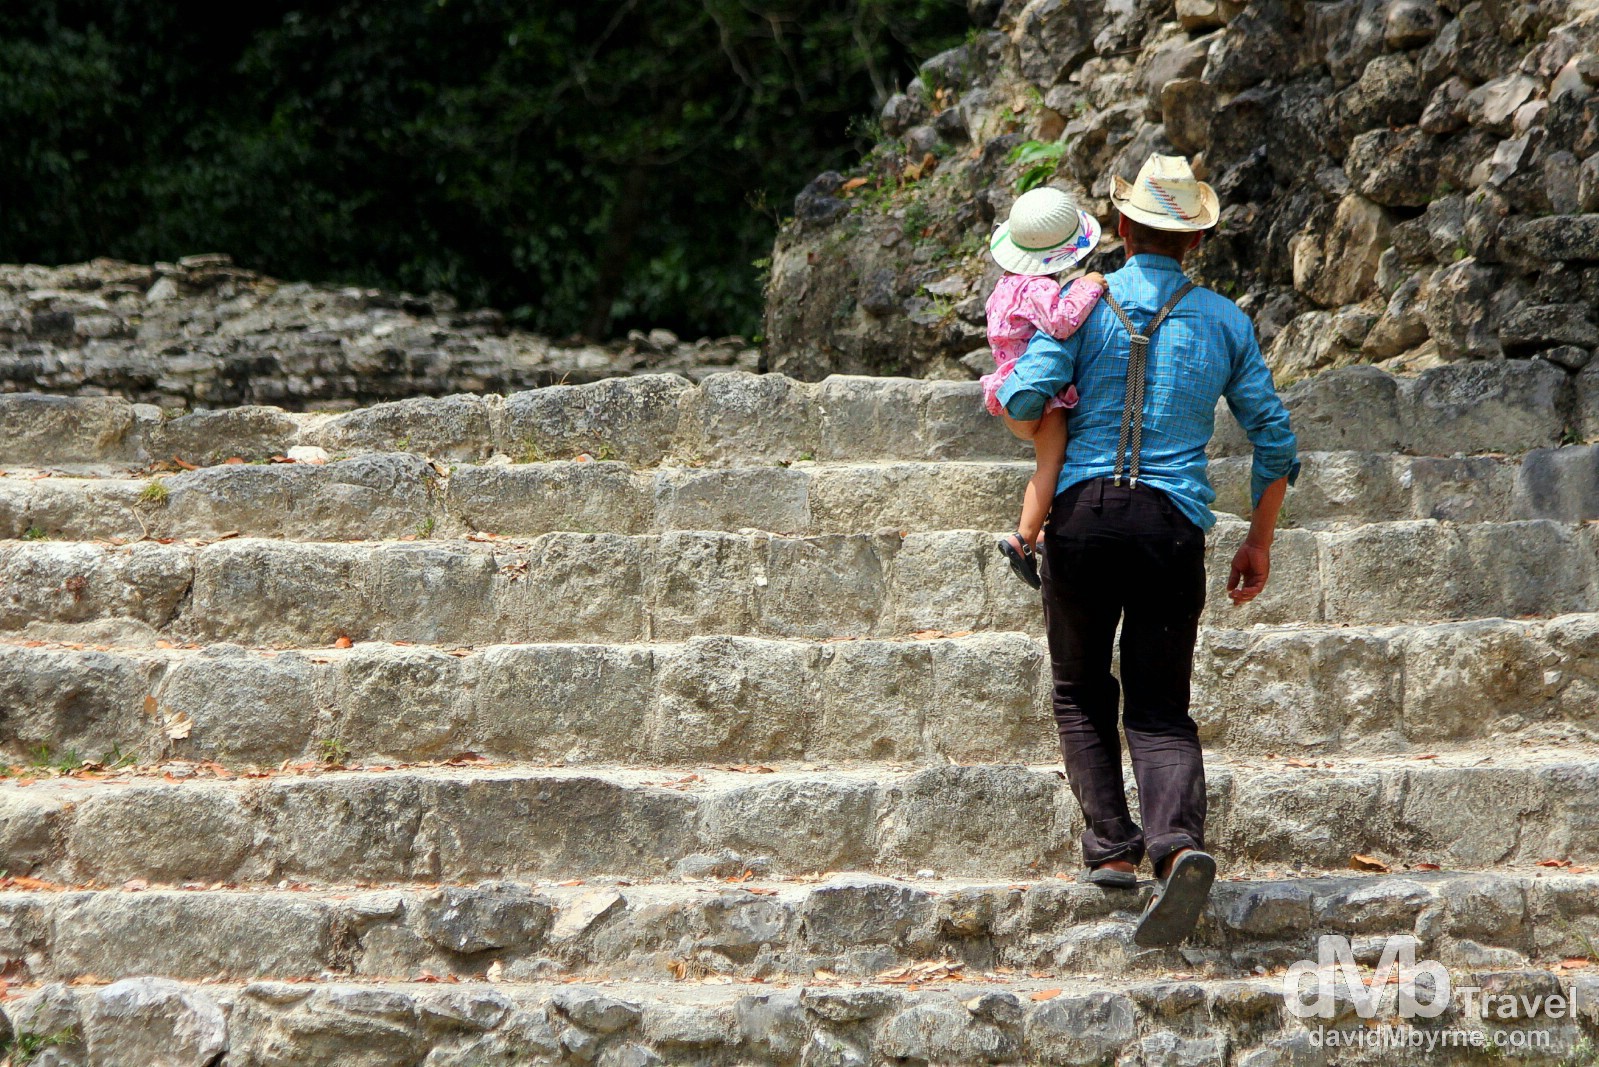 Ascending the steps of the Jaguar Temple at the Lamanai Mayan ruins in Central Belize. May 11th 2013.